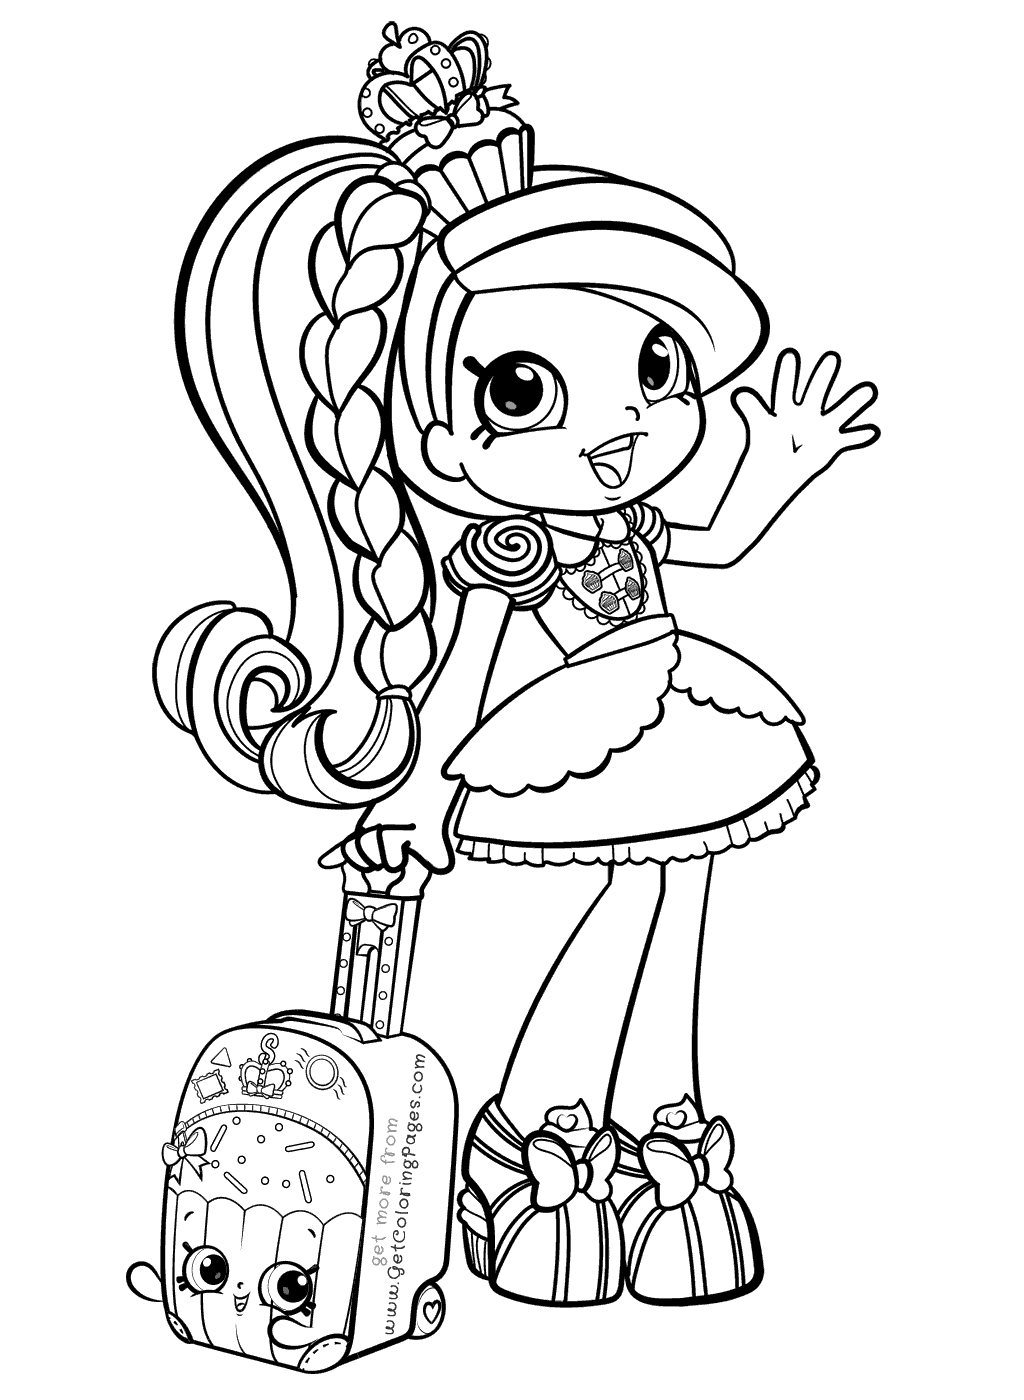 39+ Coloring Pages For Girls Printable Free Gif - COLORIST